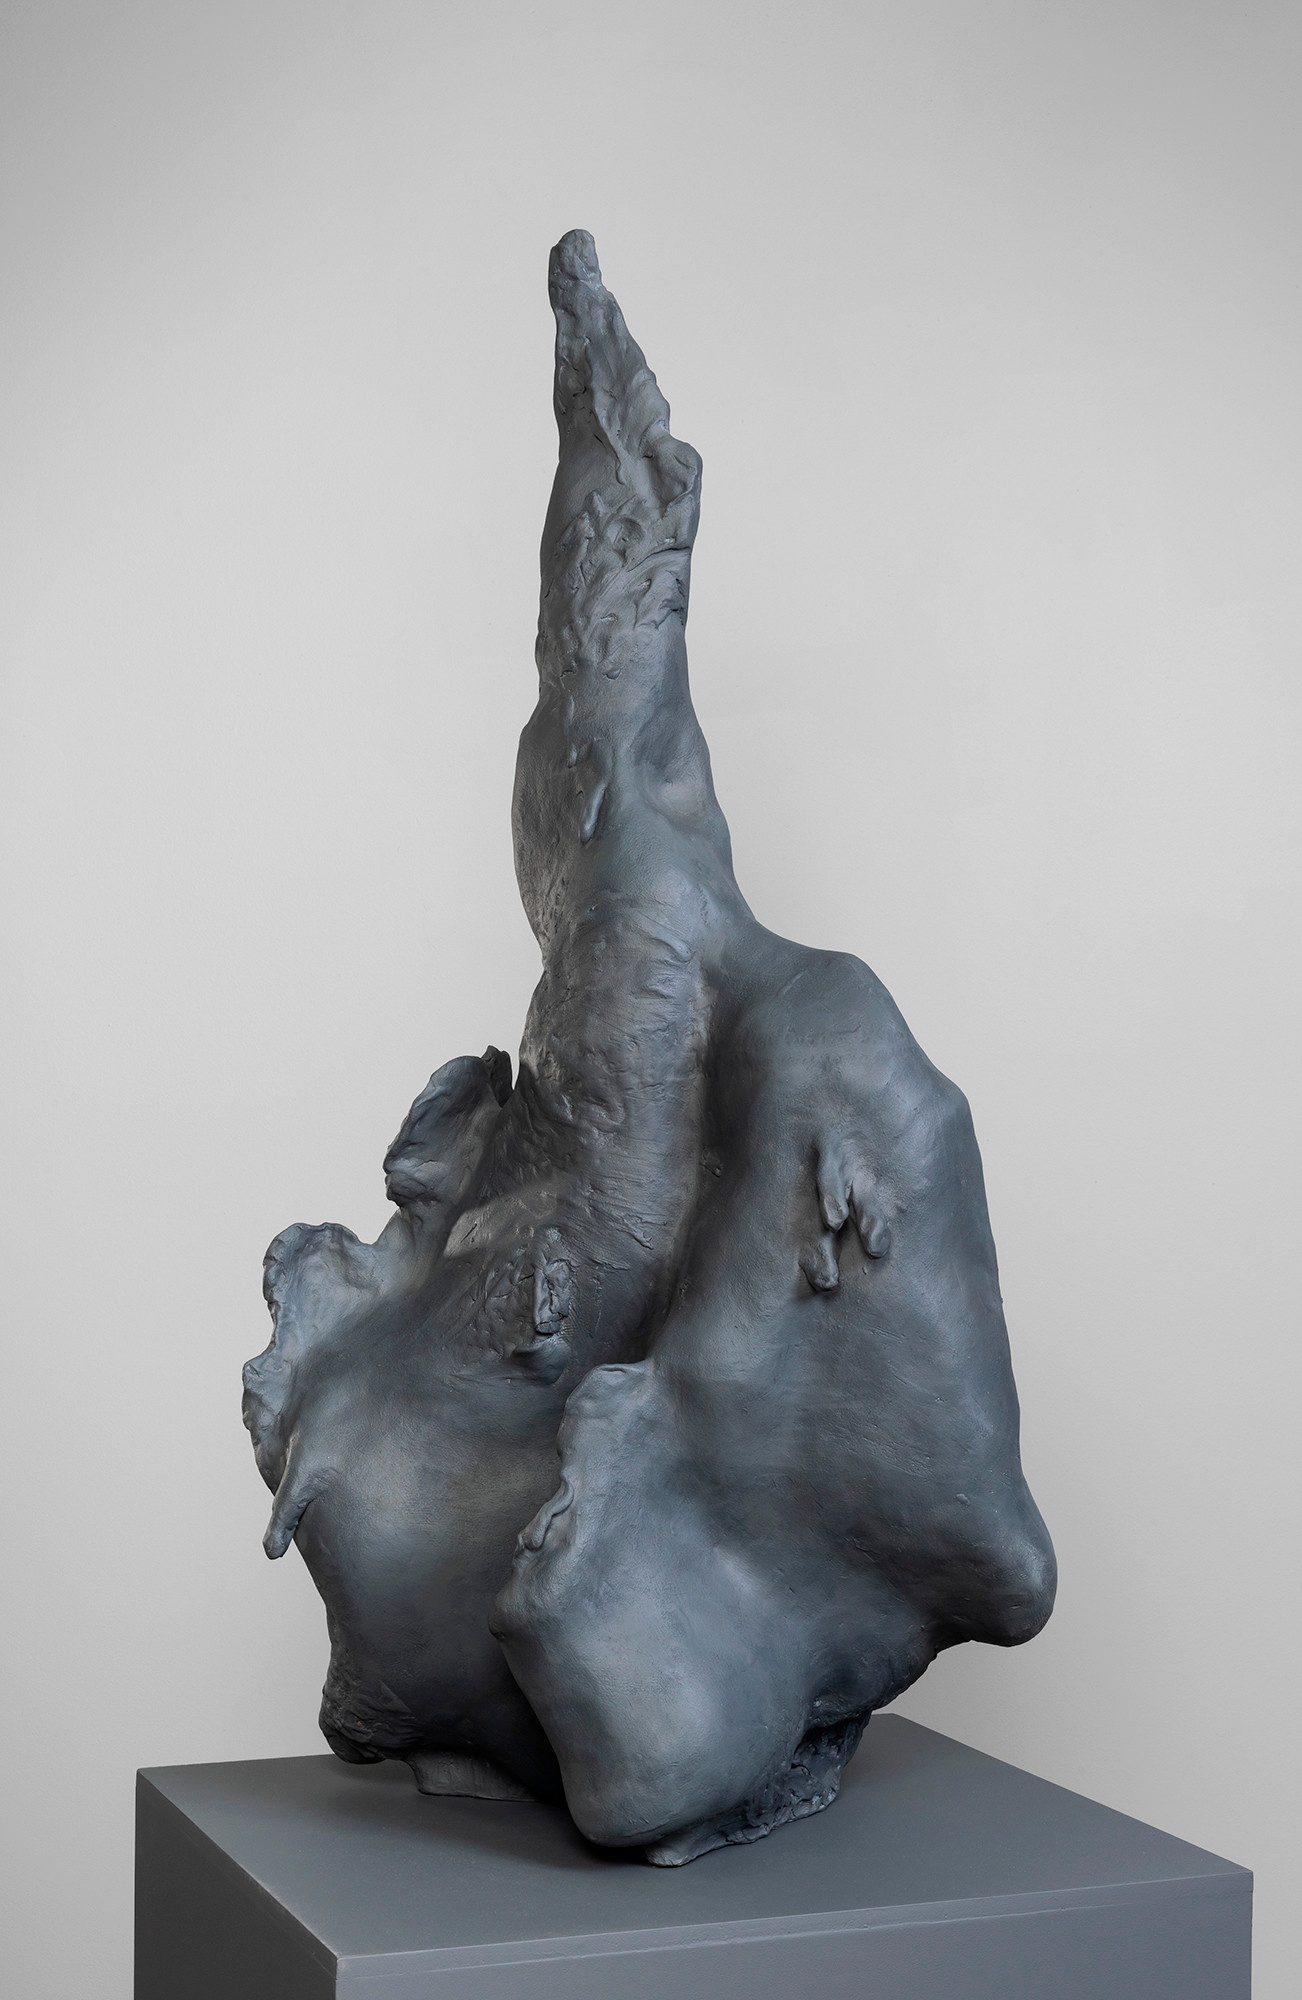 A dark, vaguely amorphous sculpture on a dark gray platform. The sculpture's forms come to a point at the top.